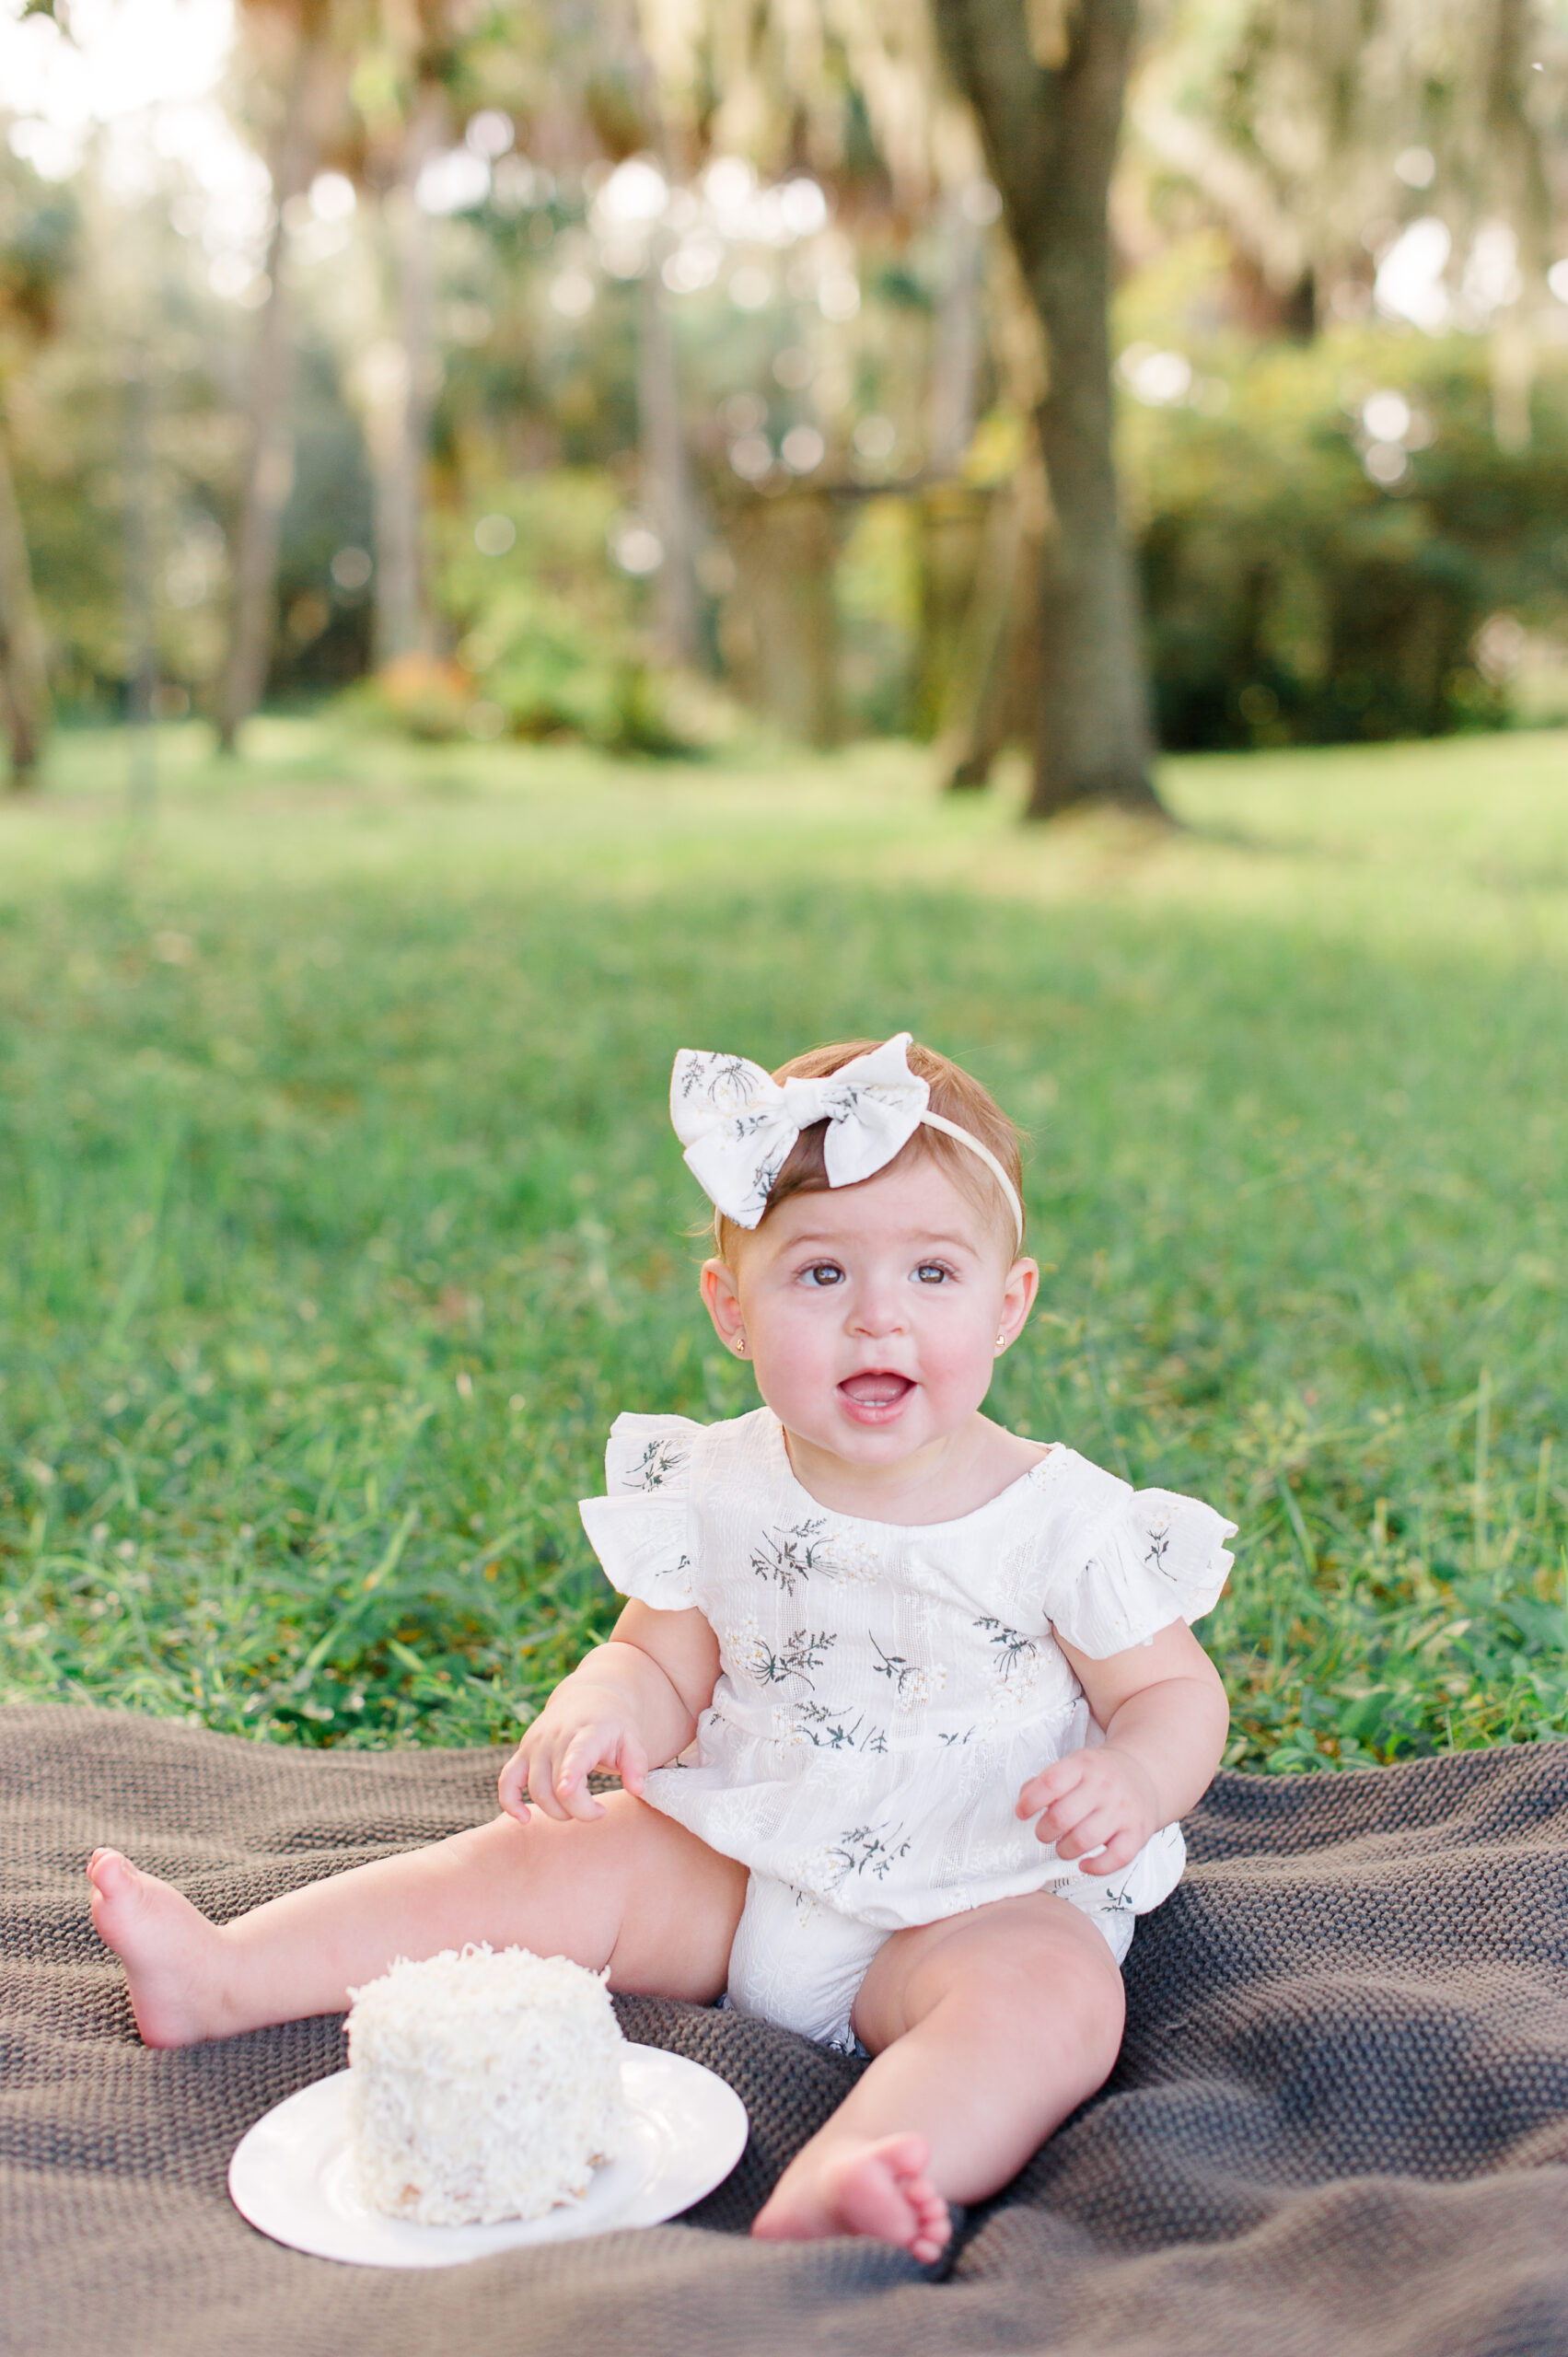 Adorable photo of a one year old sitting in grass with her birthday cake Twinkle Toes Nanny Agency